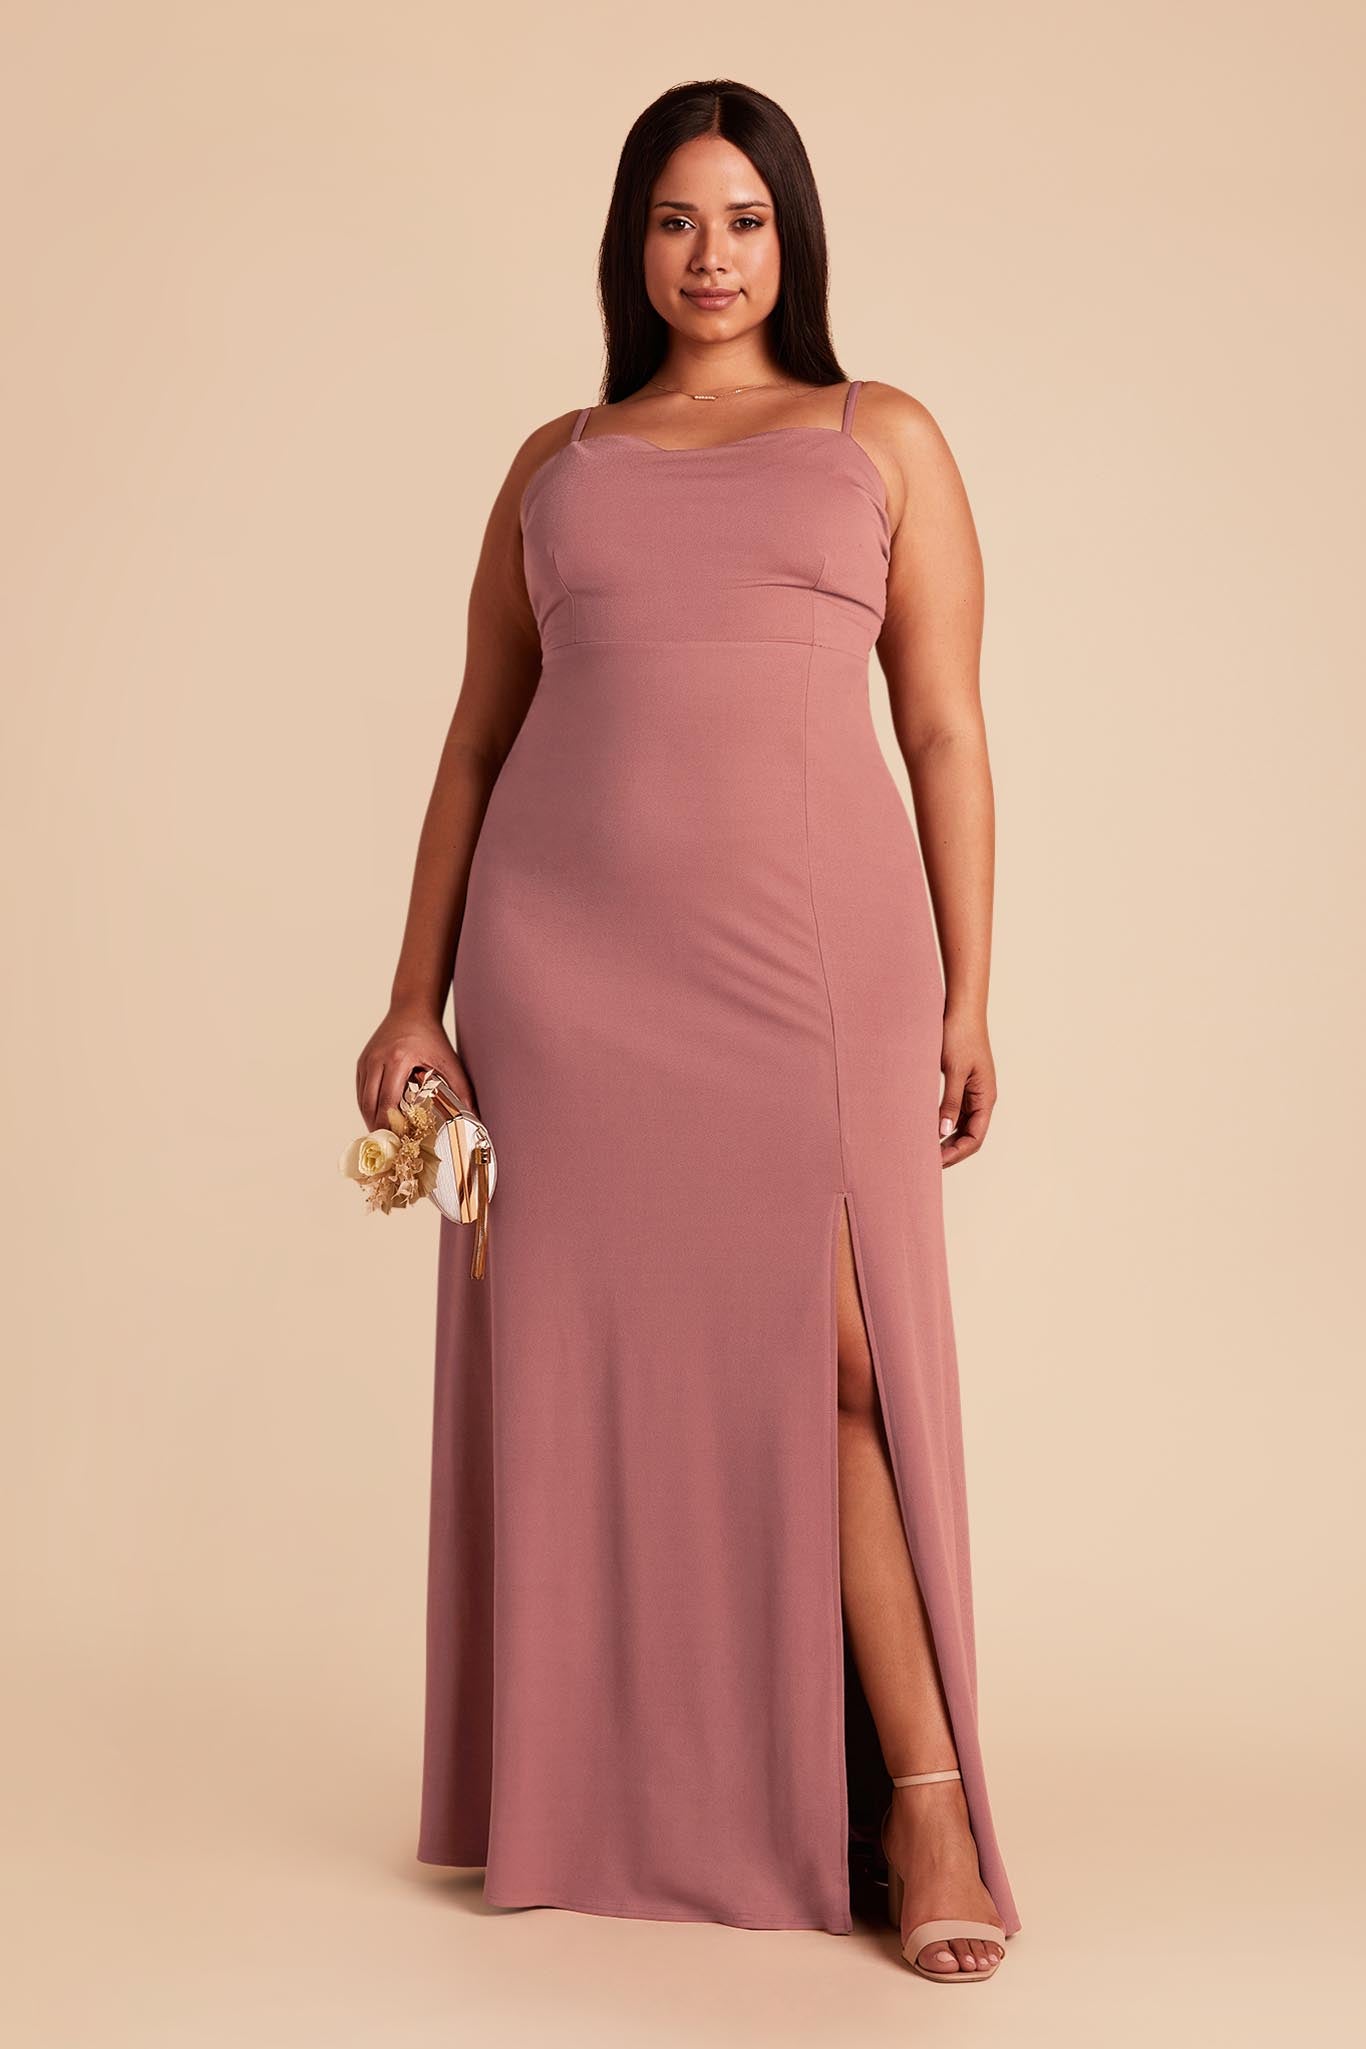 Crepe Dresses & Gowns, Afterpay, Sezzle